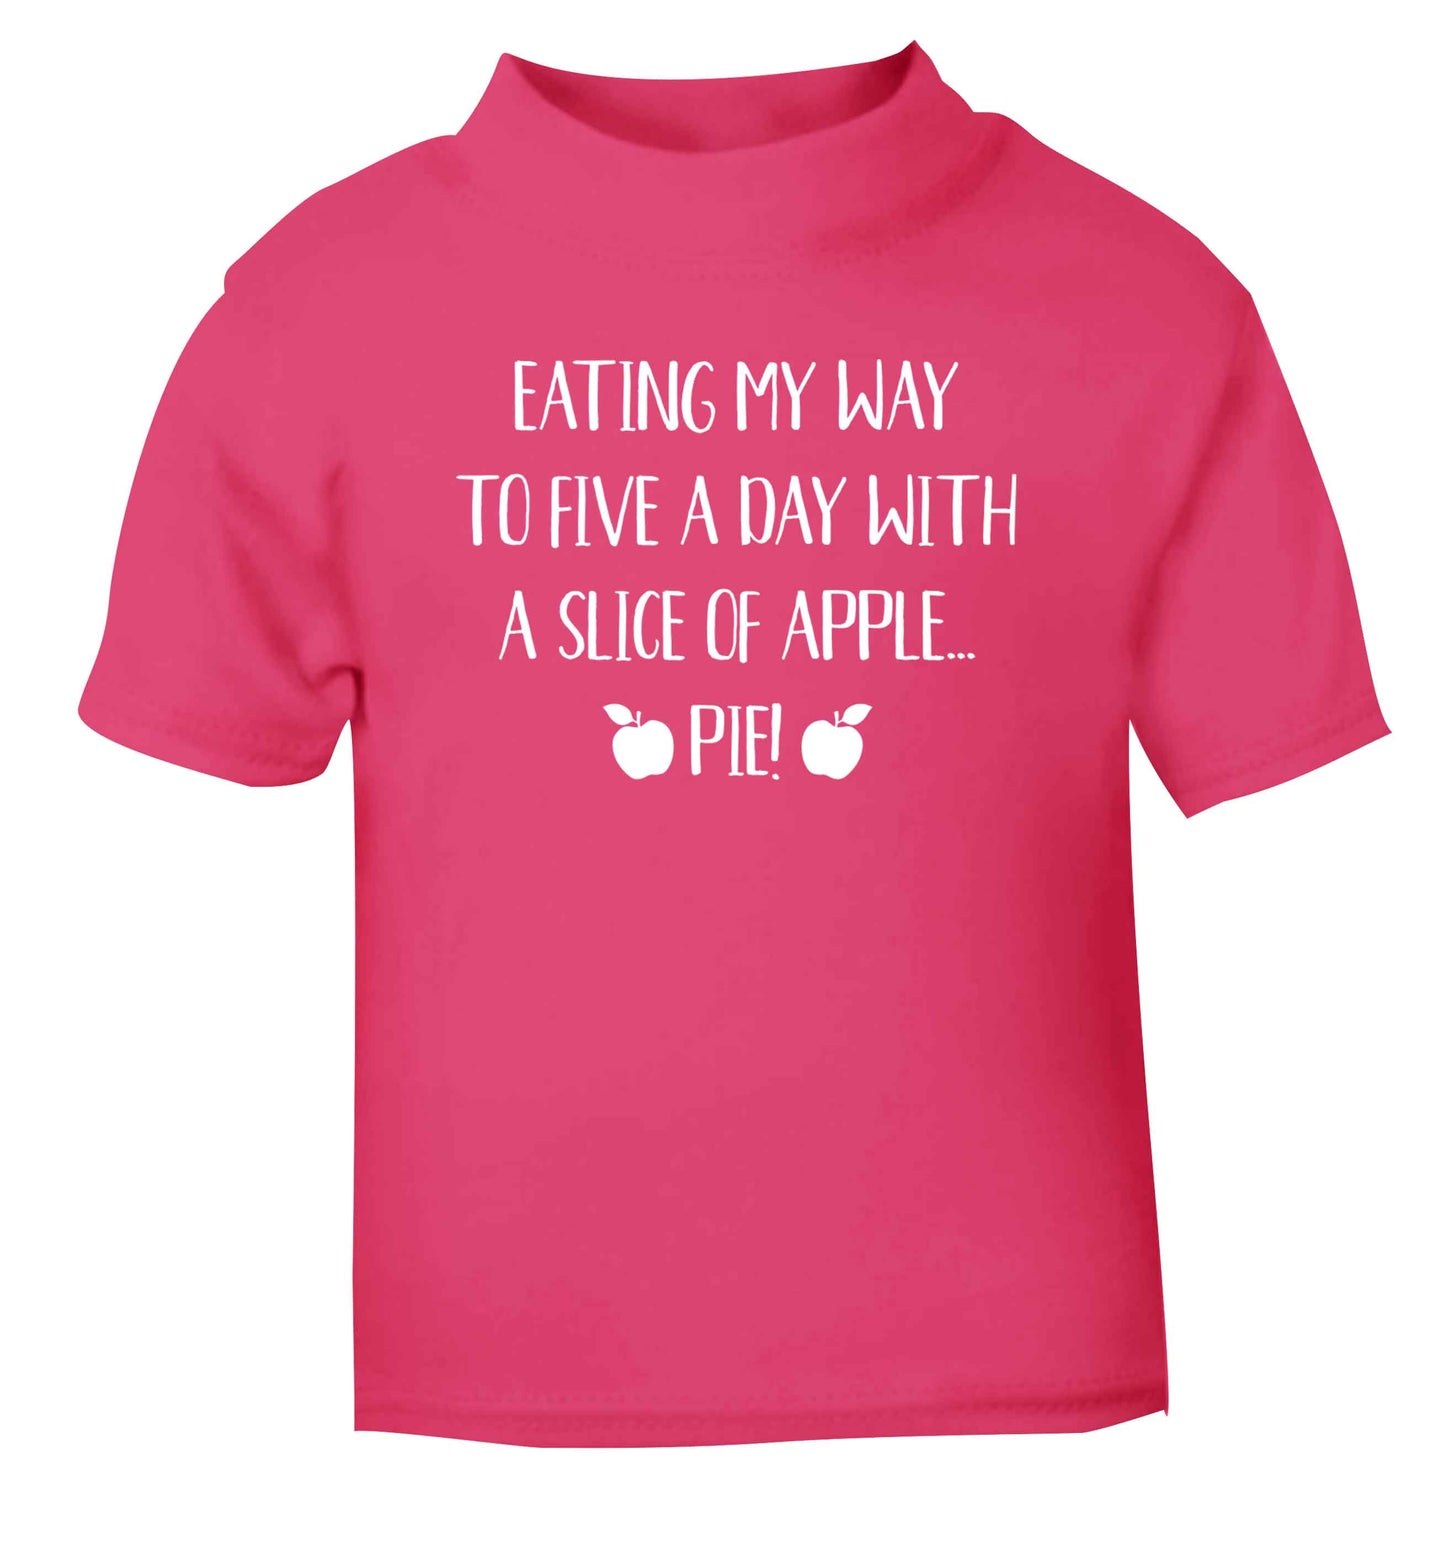 Eating my way to five a day with a slice of apple pie pink Baby Toddler Tshirt 2 Years